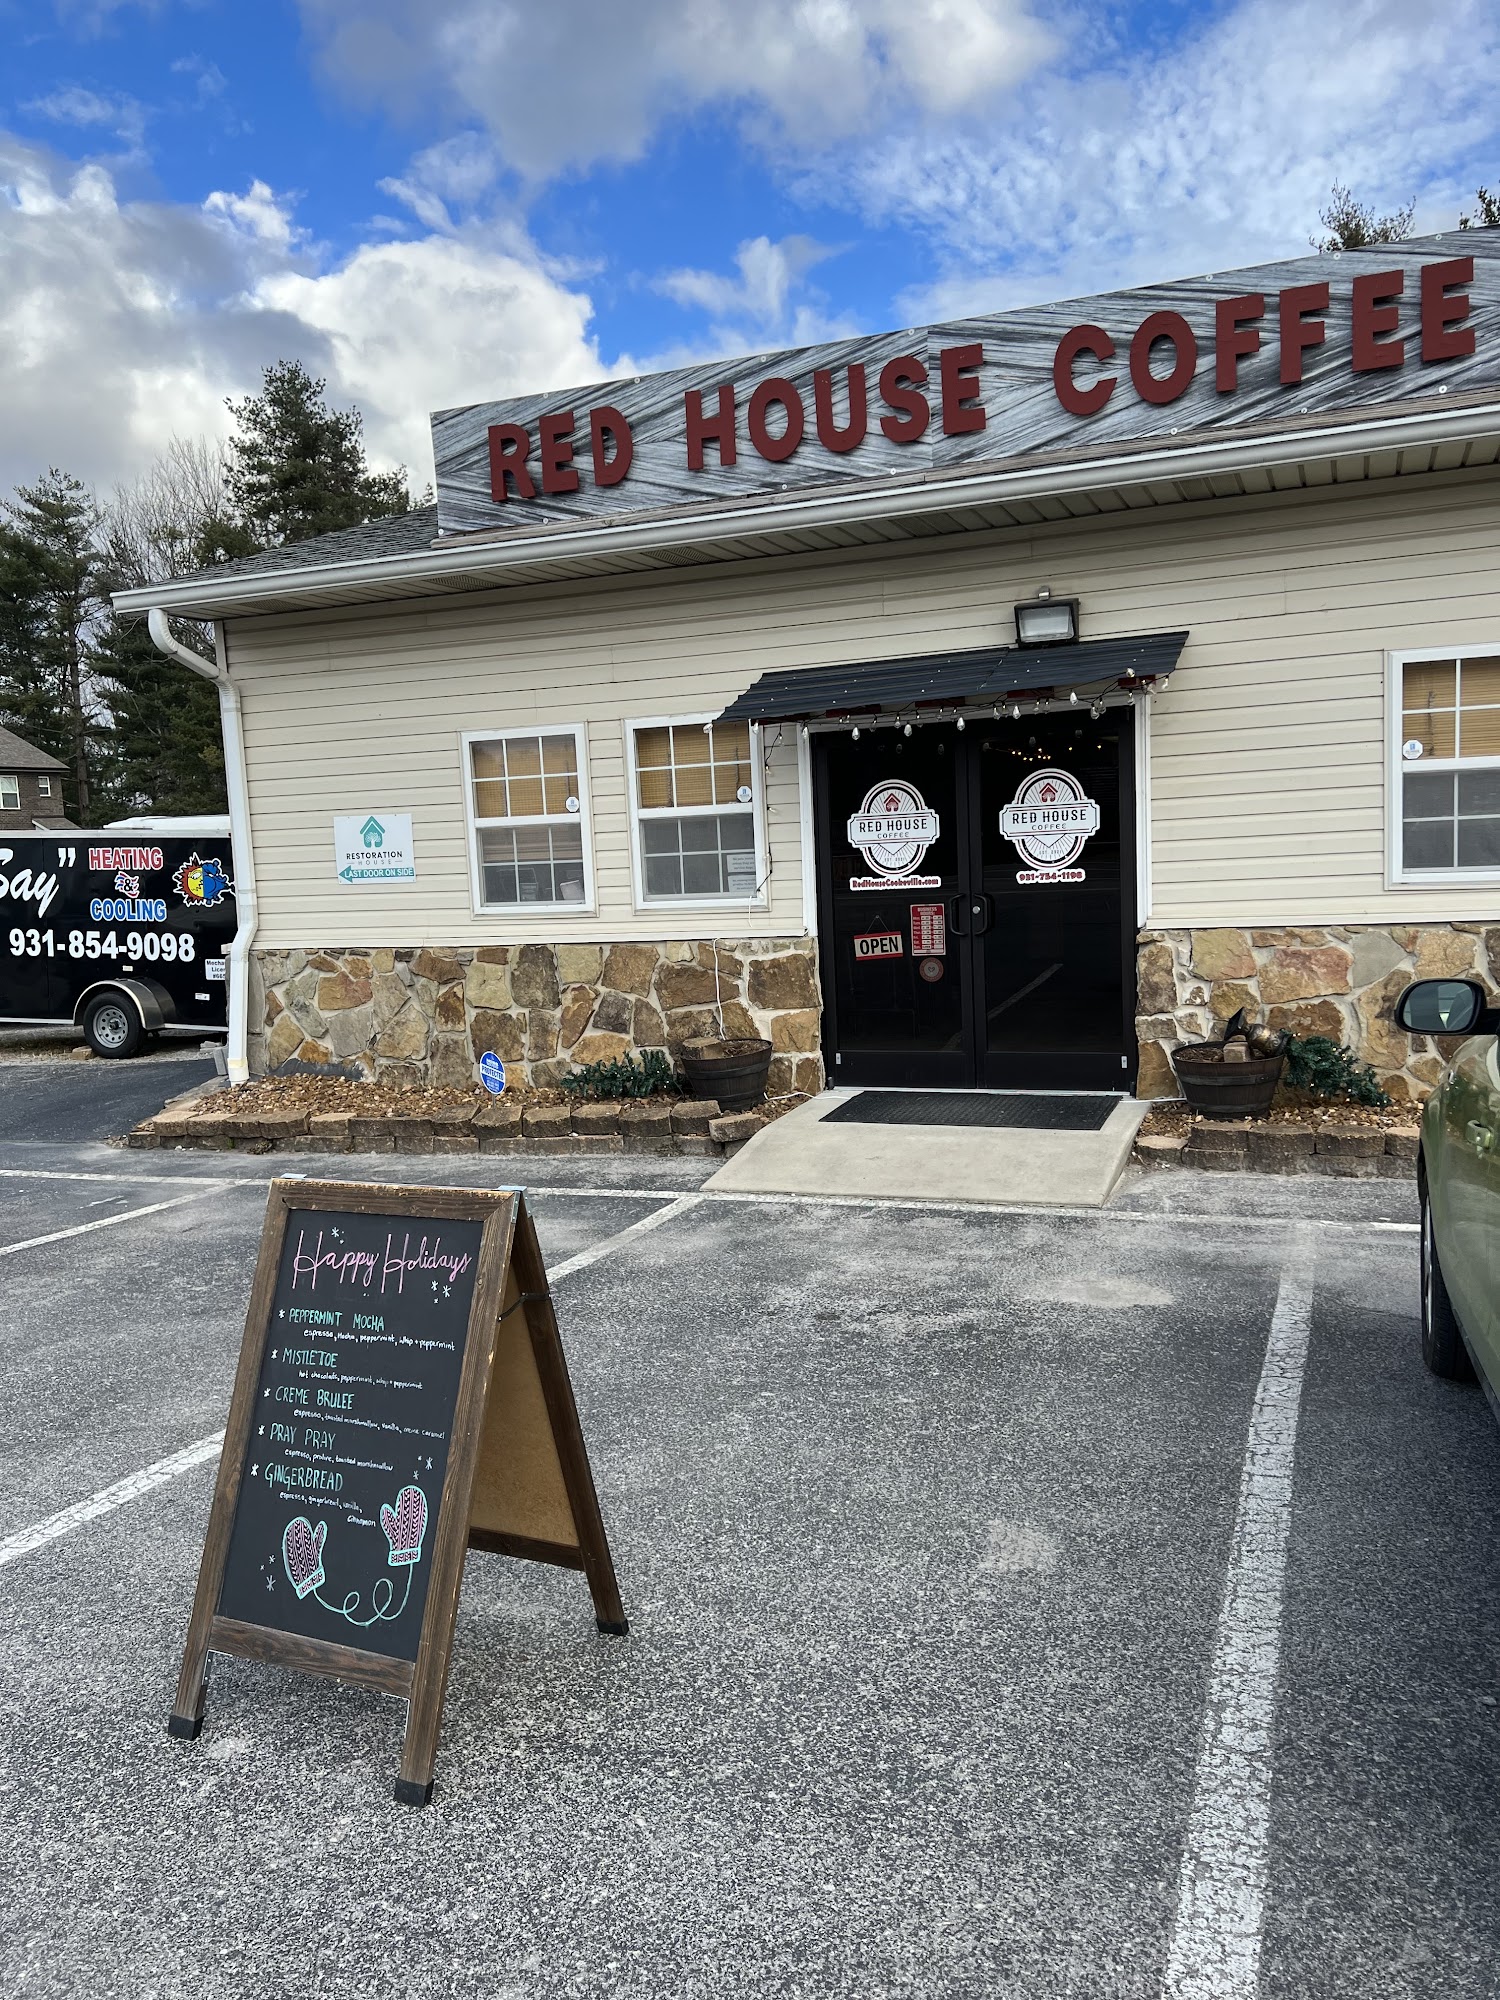 Red House Coffee